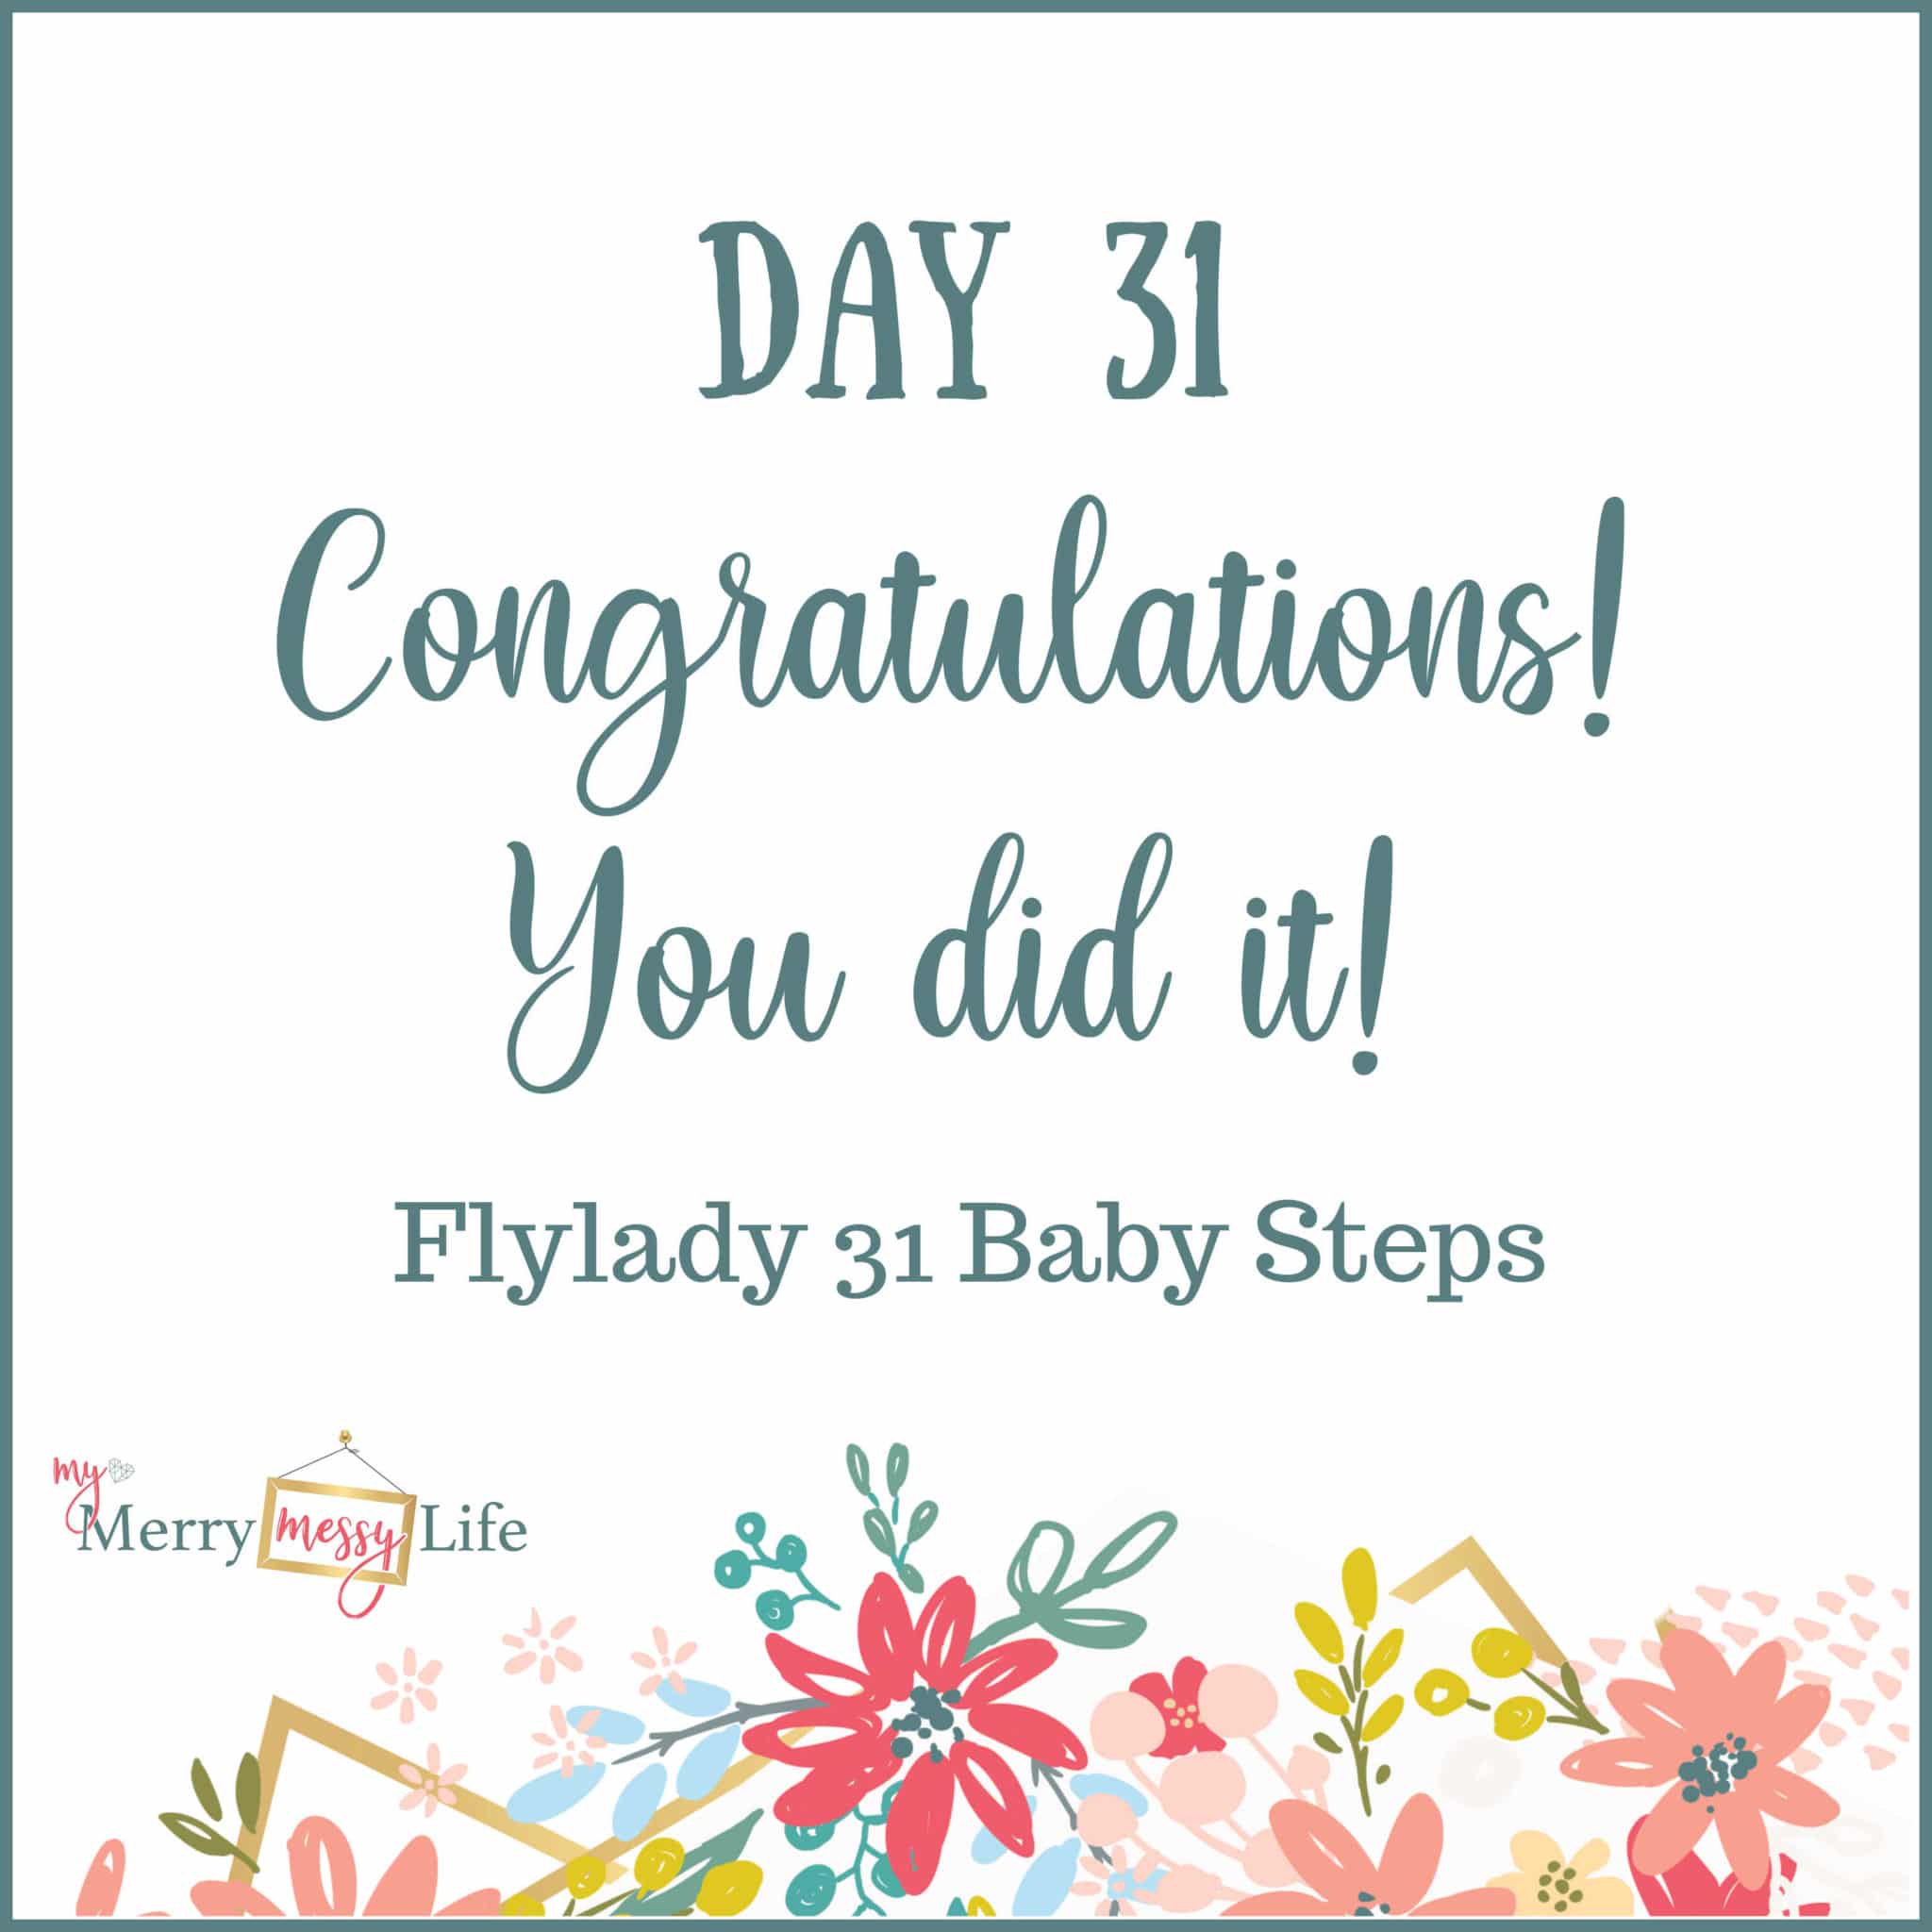 Flylady 31 Baby Steps - Day 31 - Congratulations! You did it!